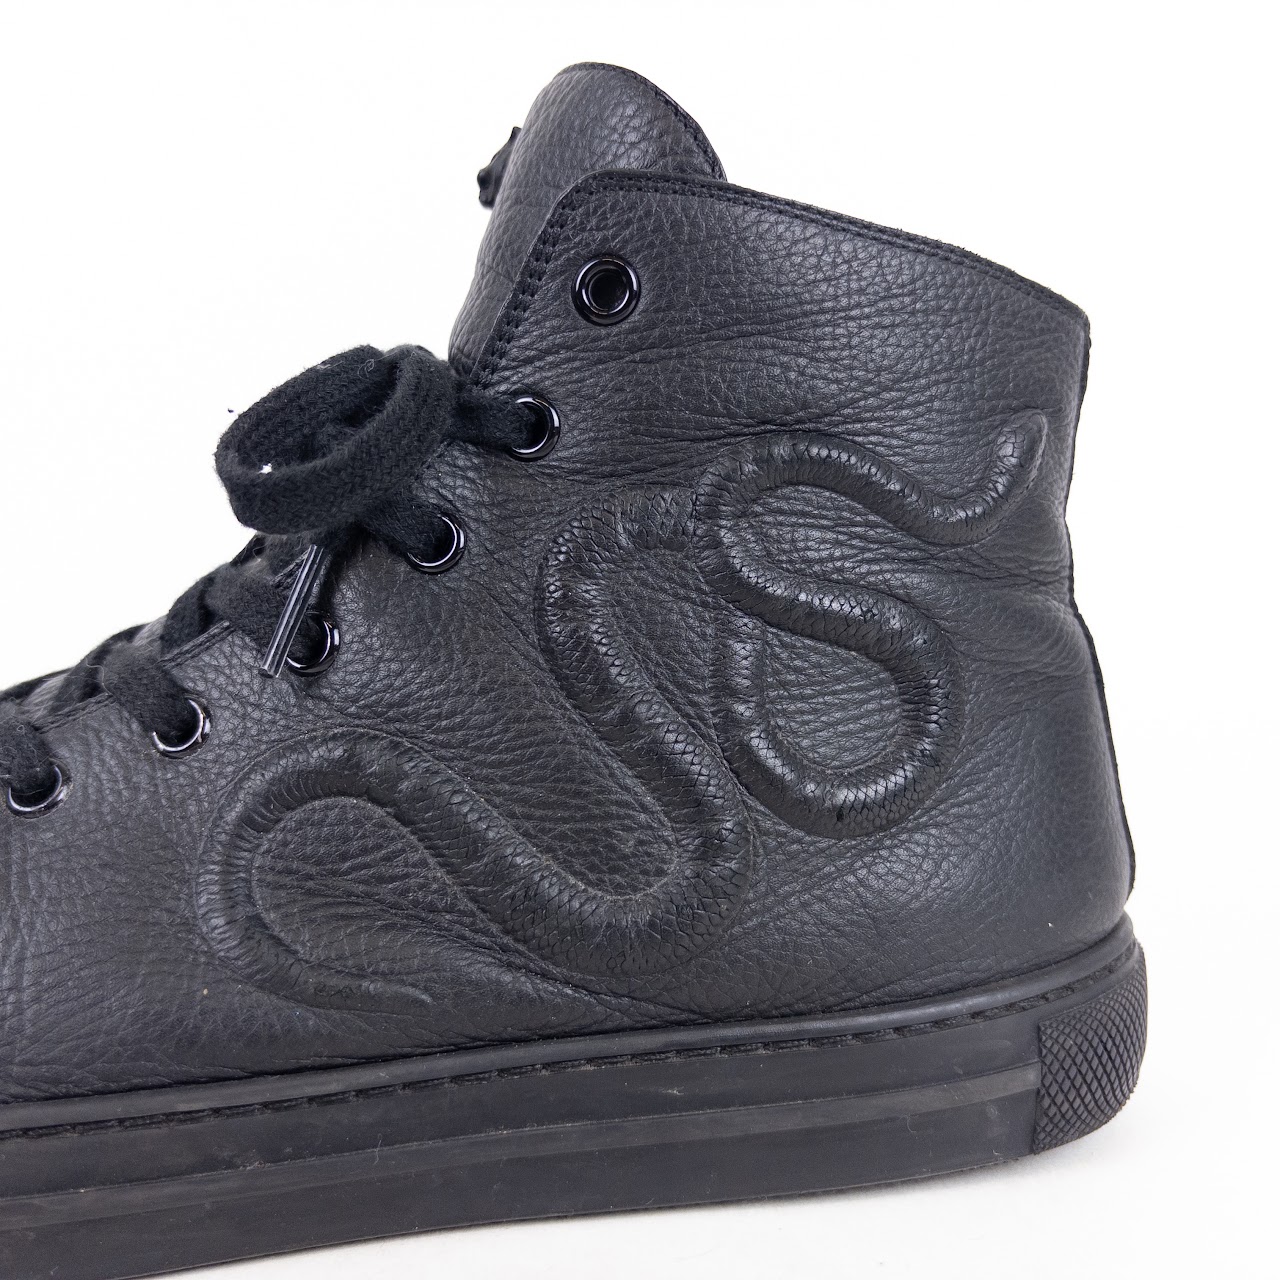 Gucci GG Leather Snake Embossed High Top Sneakers